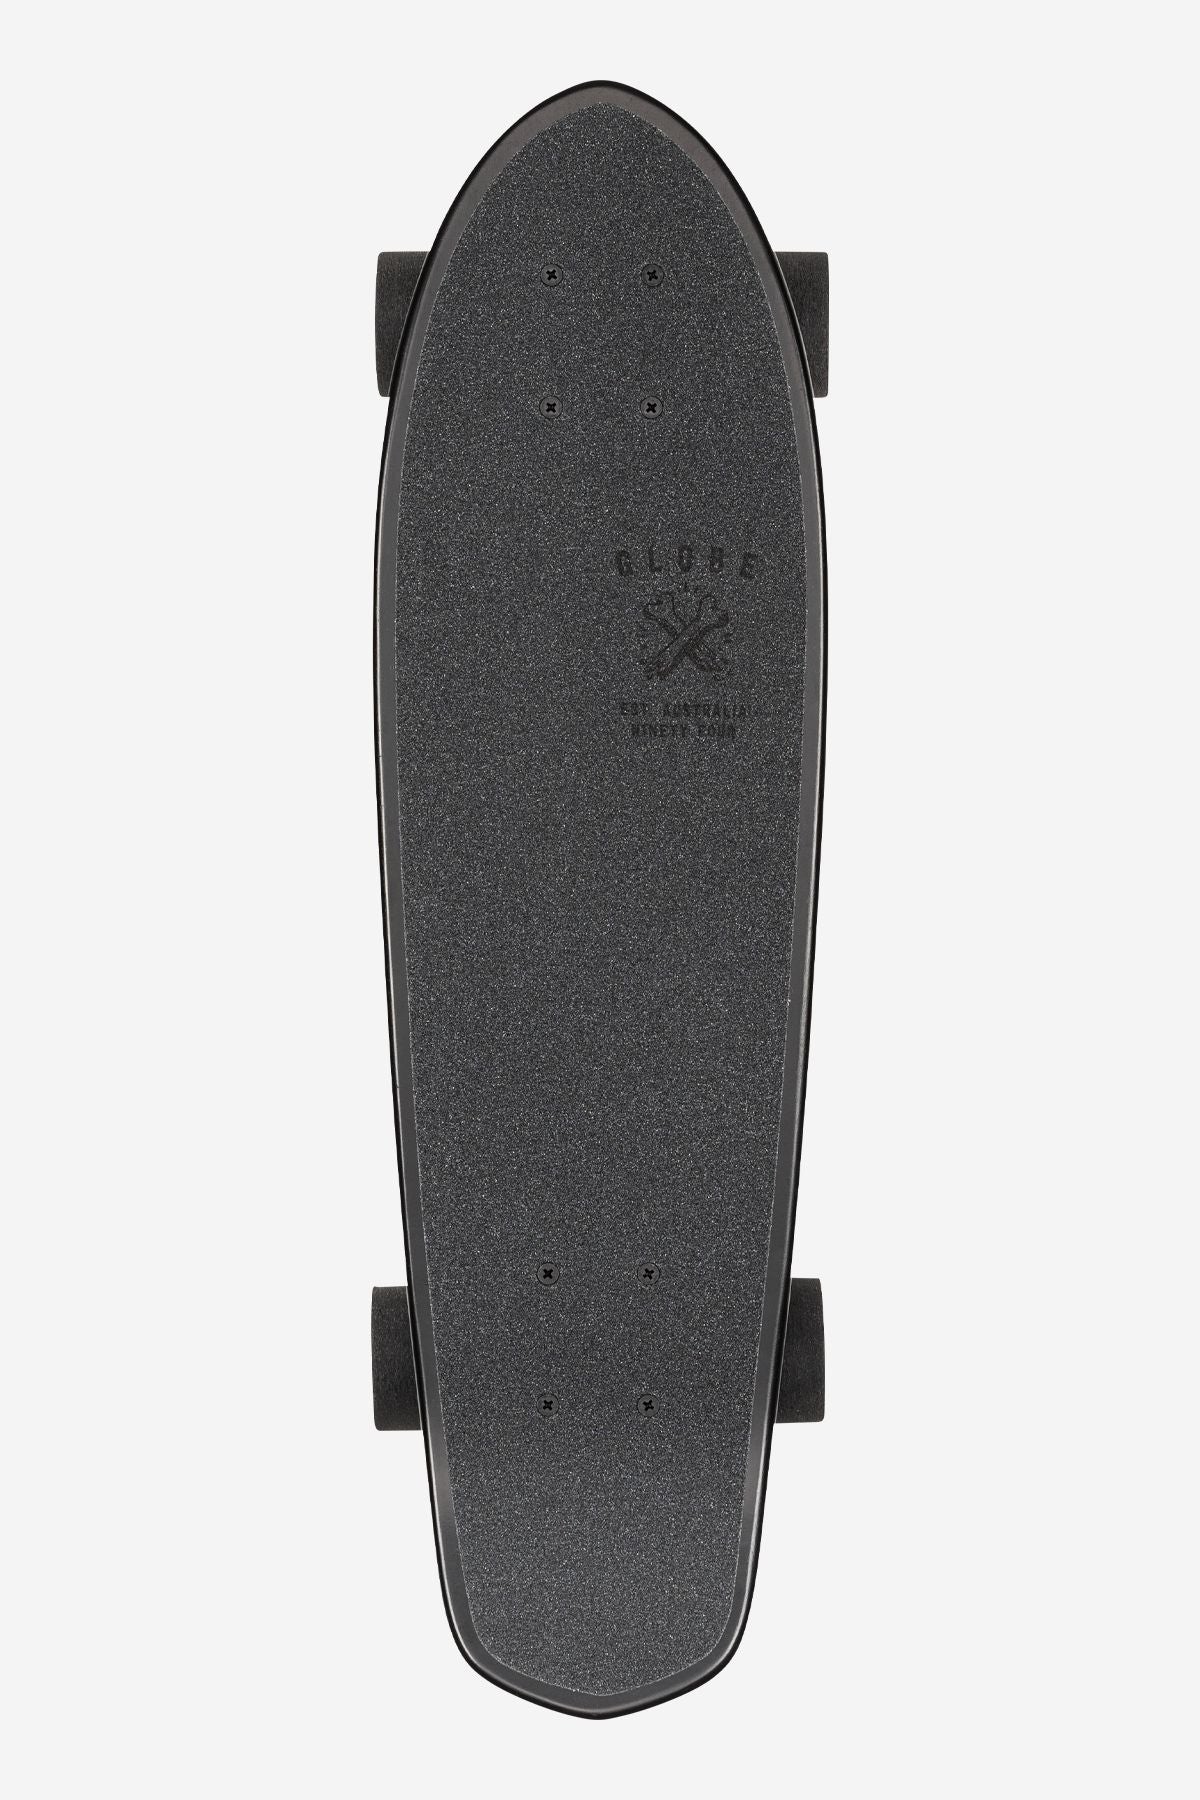 grip tape of Blazer 26" Cruiser - Black the F out